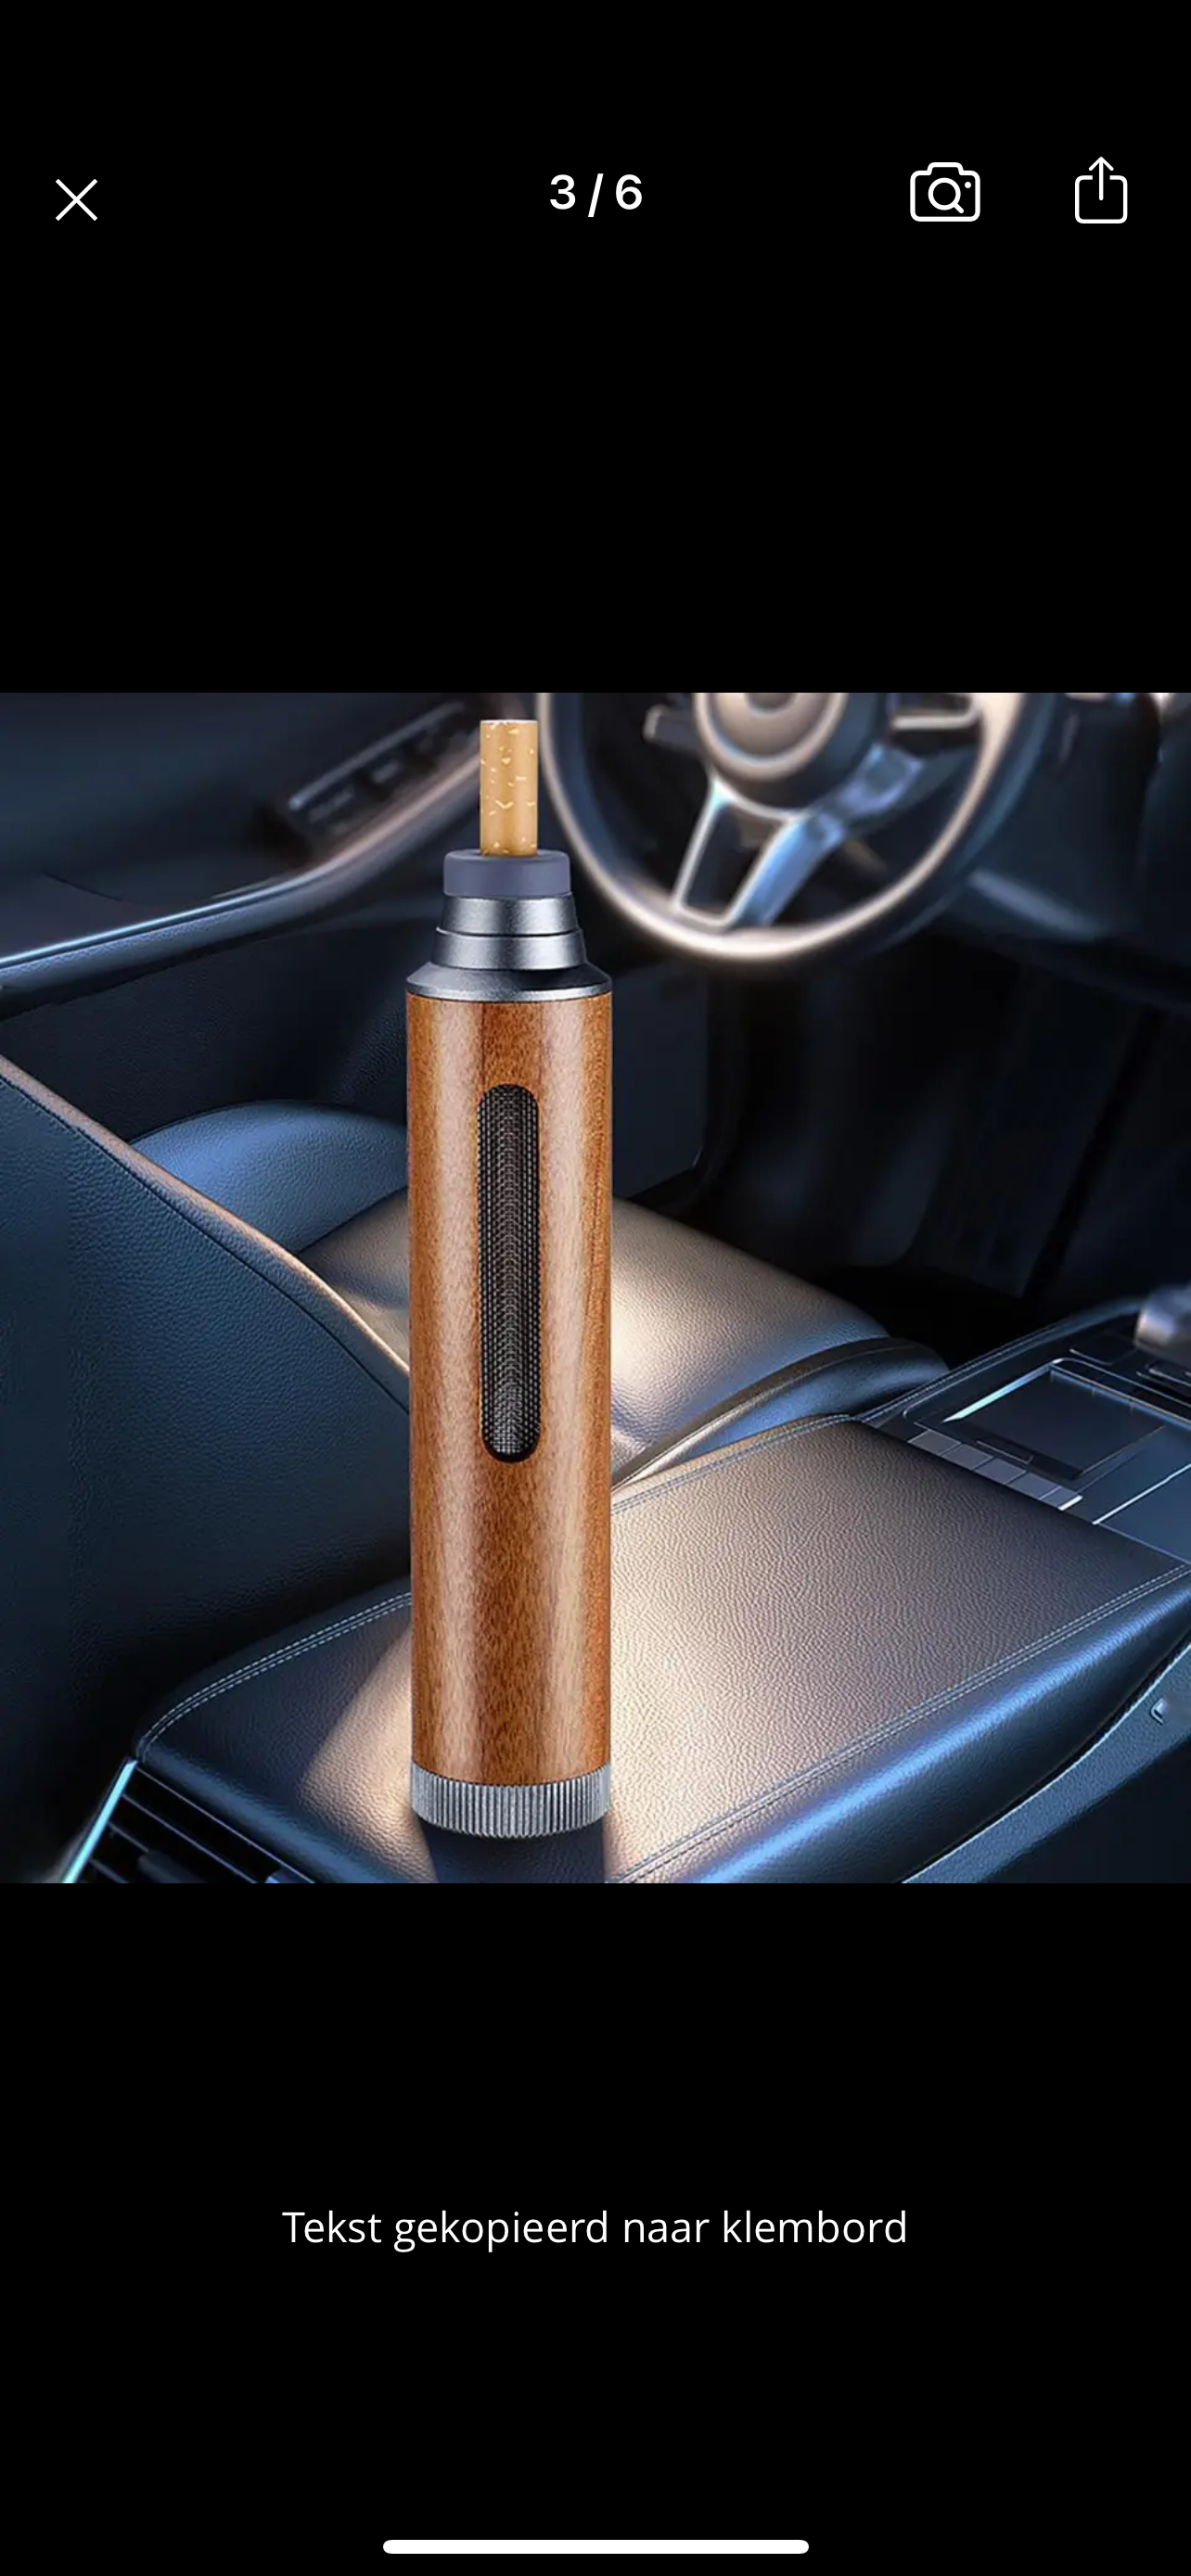 Wooden Car Ashtray Durable Cigarette Holder for Outdoor Bars, Cars and Hotels Dimensions 133x28mm